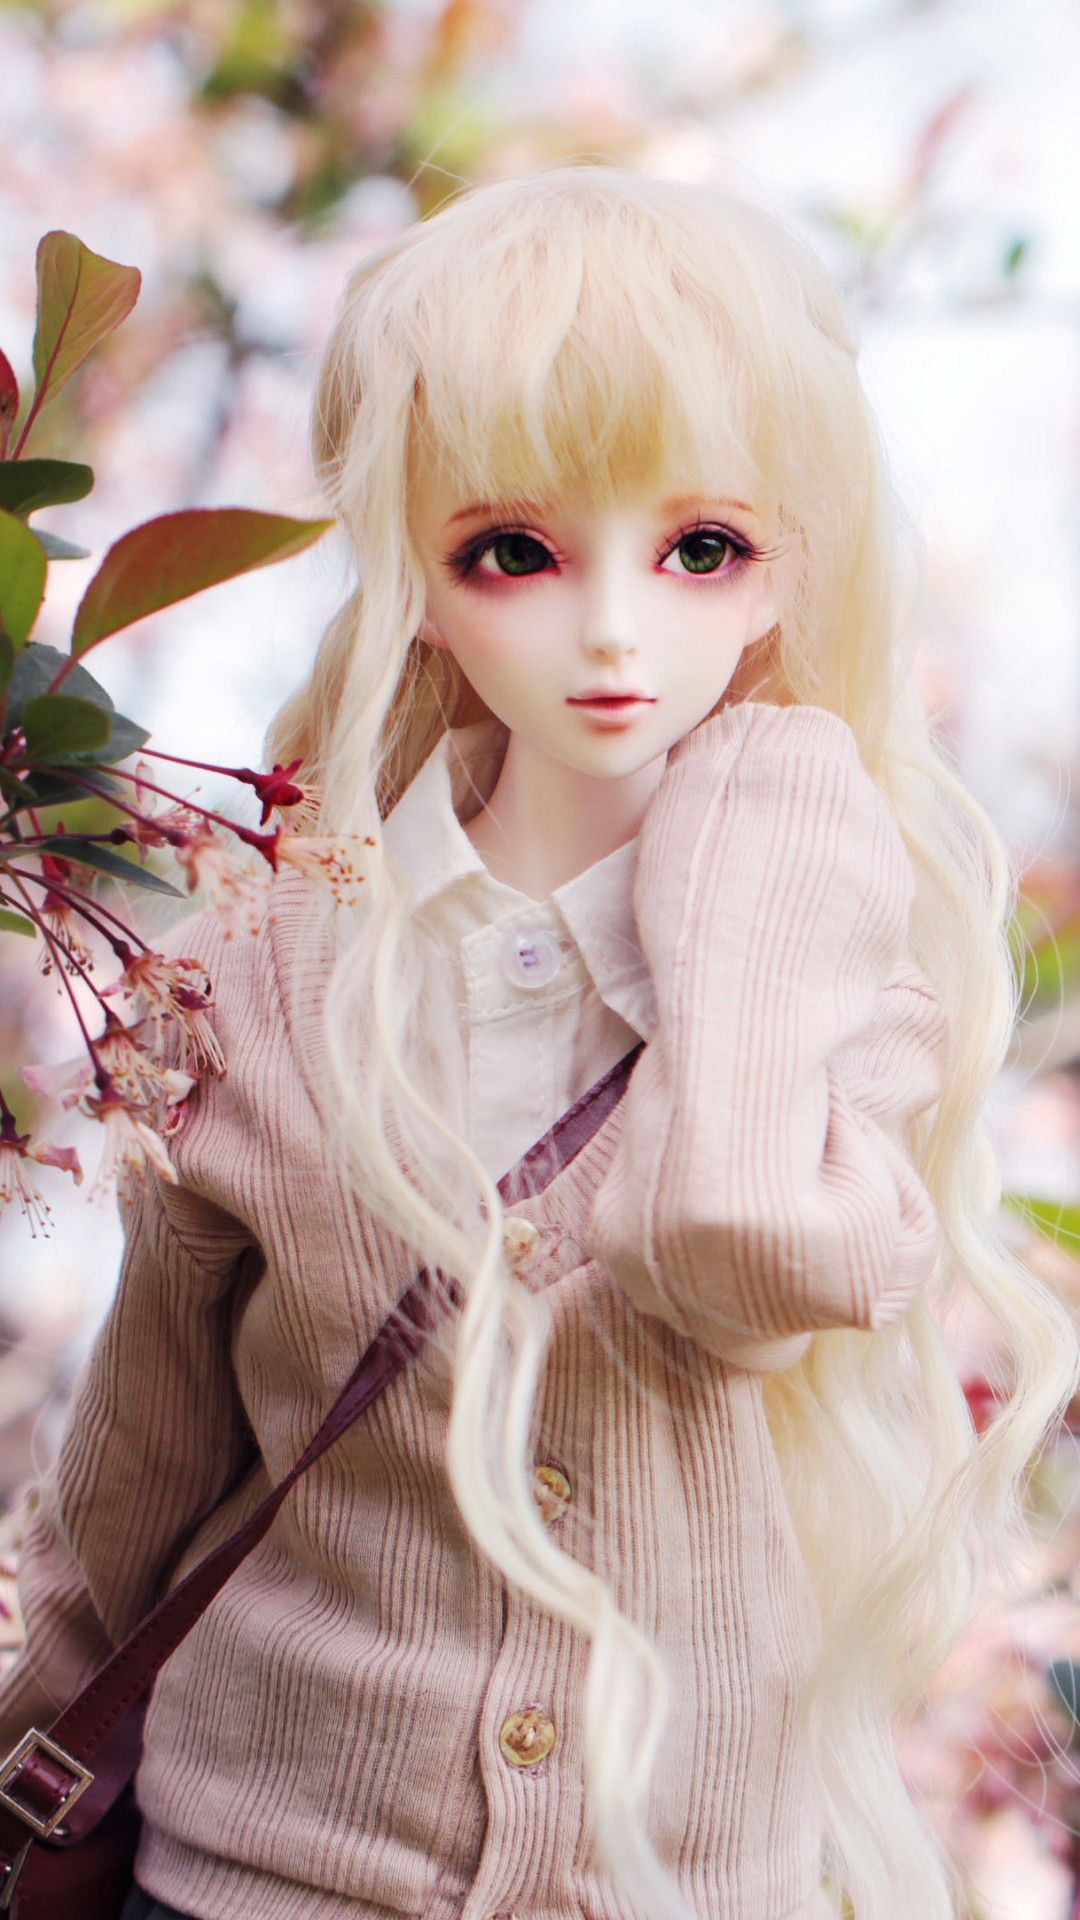 Beautiful SD Doll IPhone 6 6 Plus And IPhone 5 4 Wallpaper